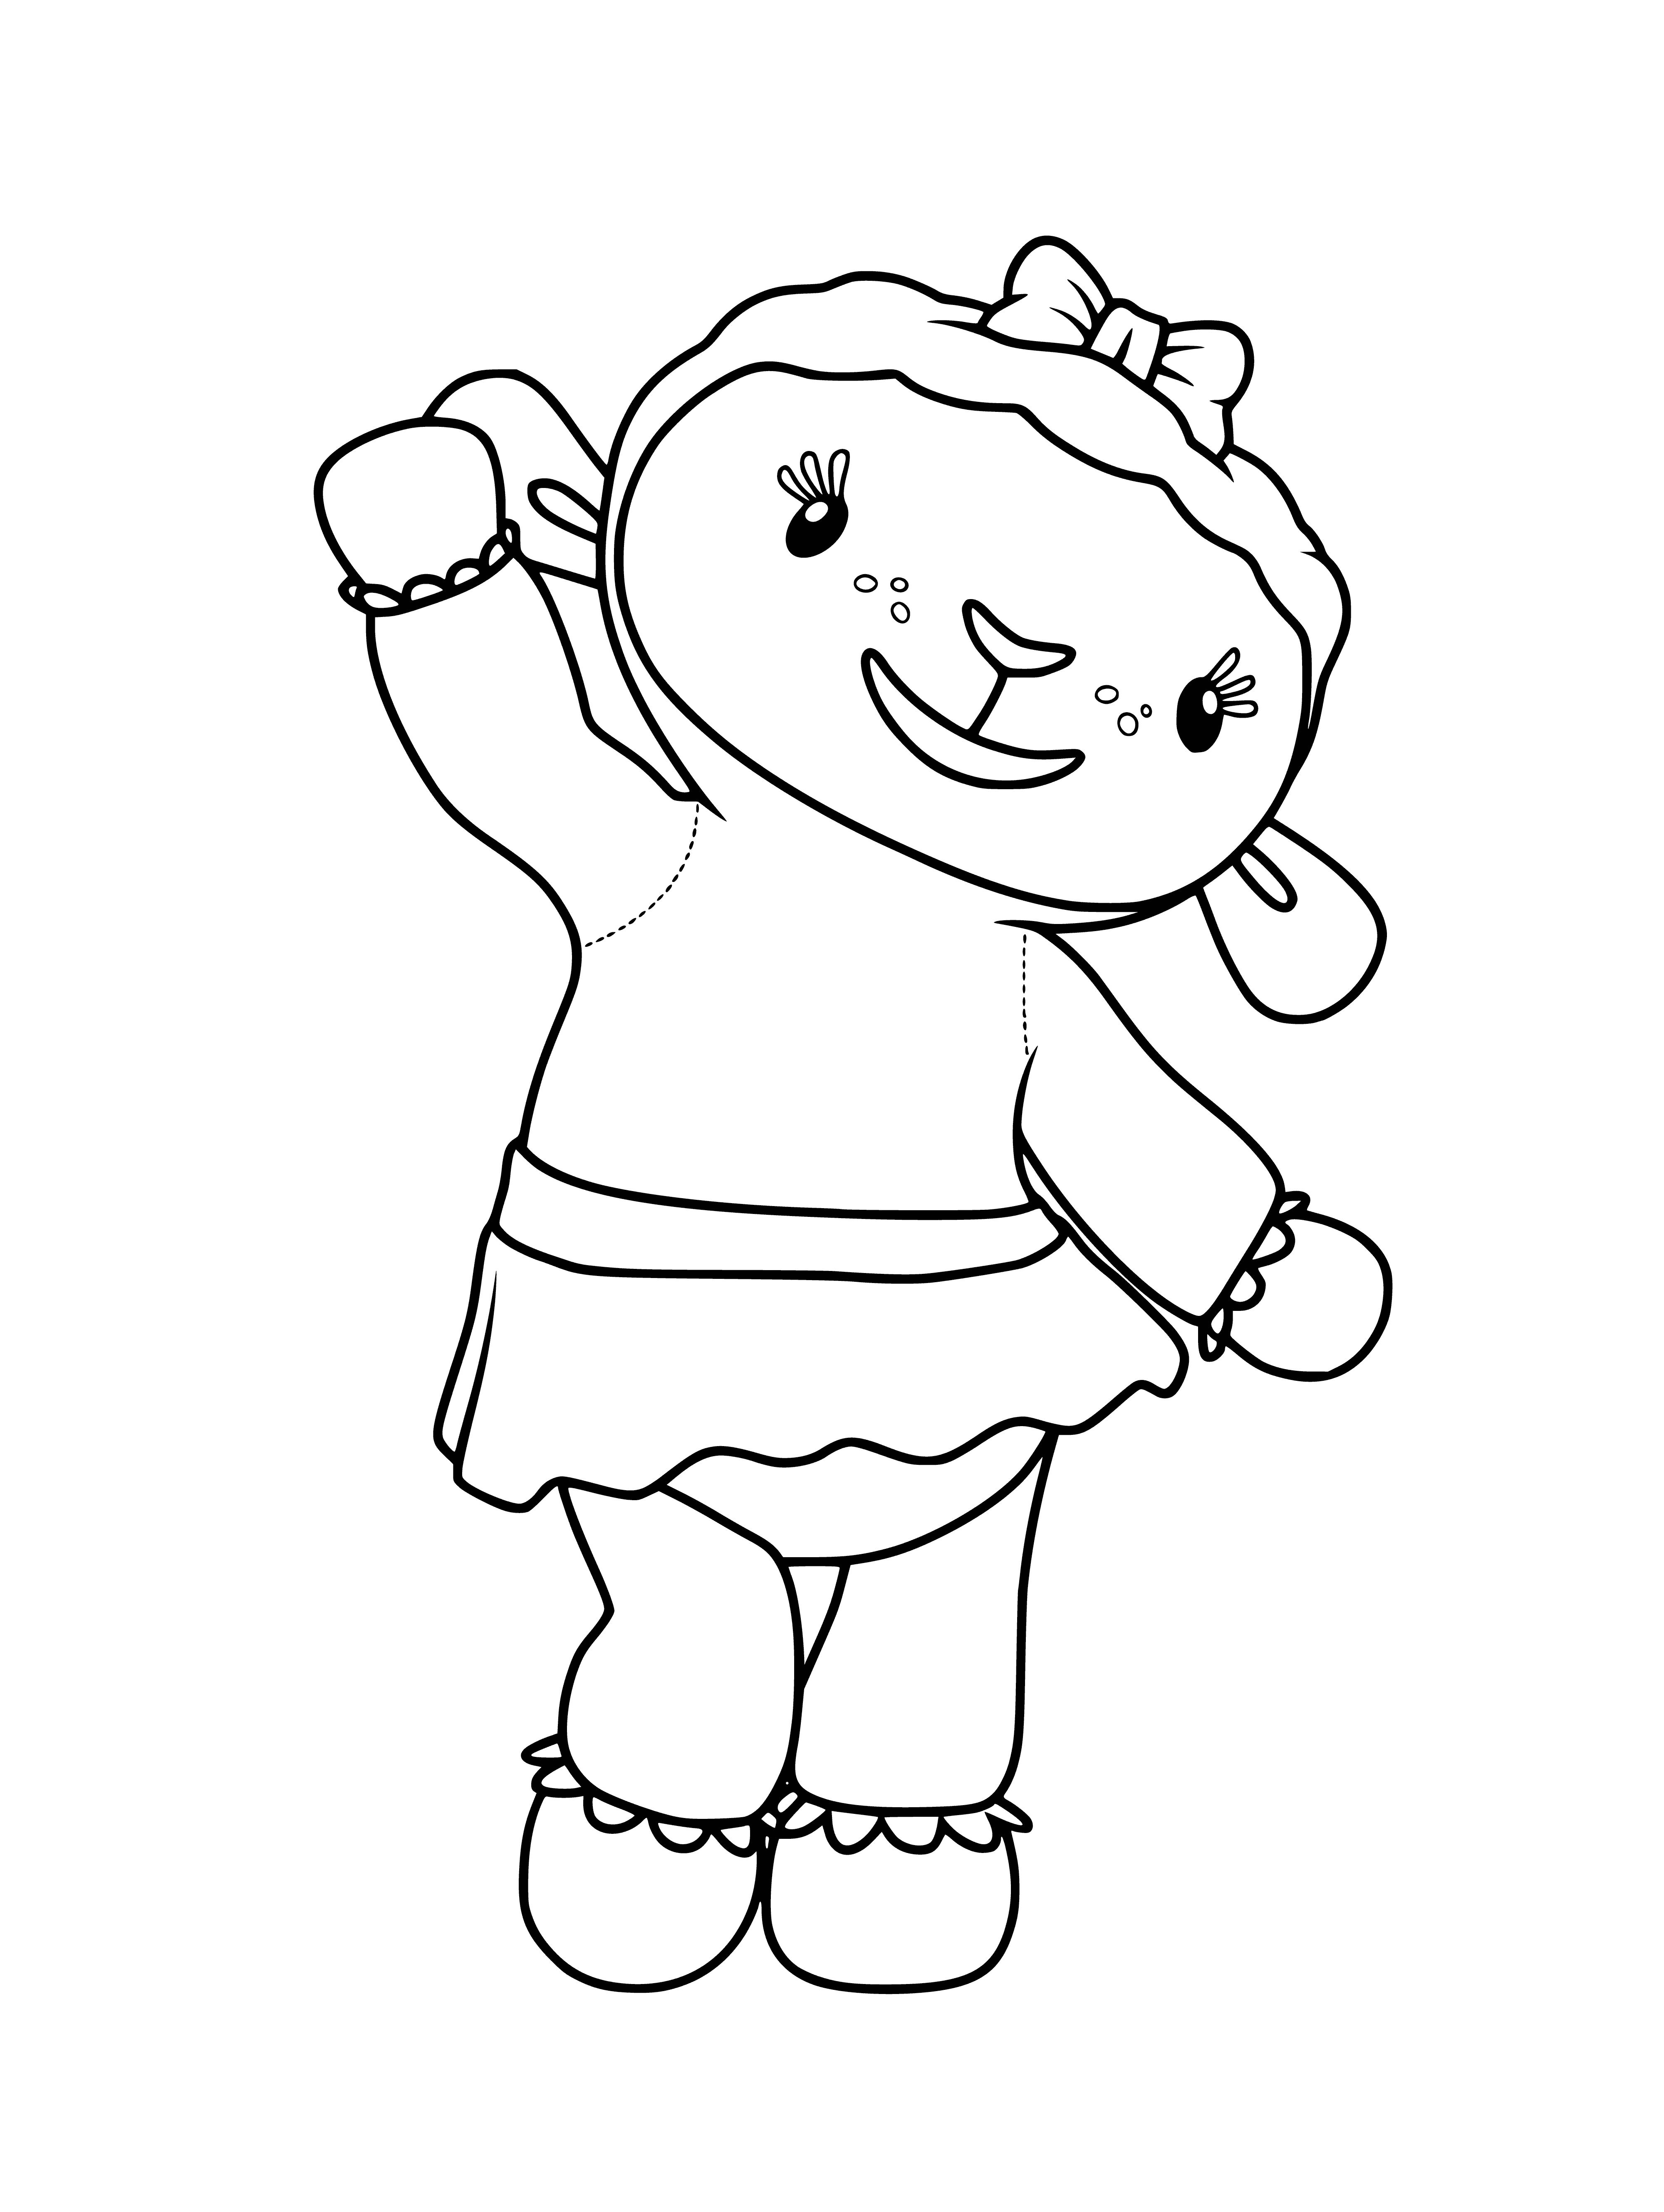 coloring page: Soft cuddly sheep toy for kids w/ pink in ears & bow - just like Lammy from Disney's "Doc McStuffins"!